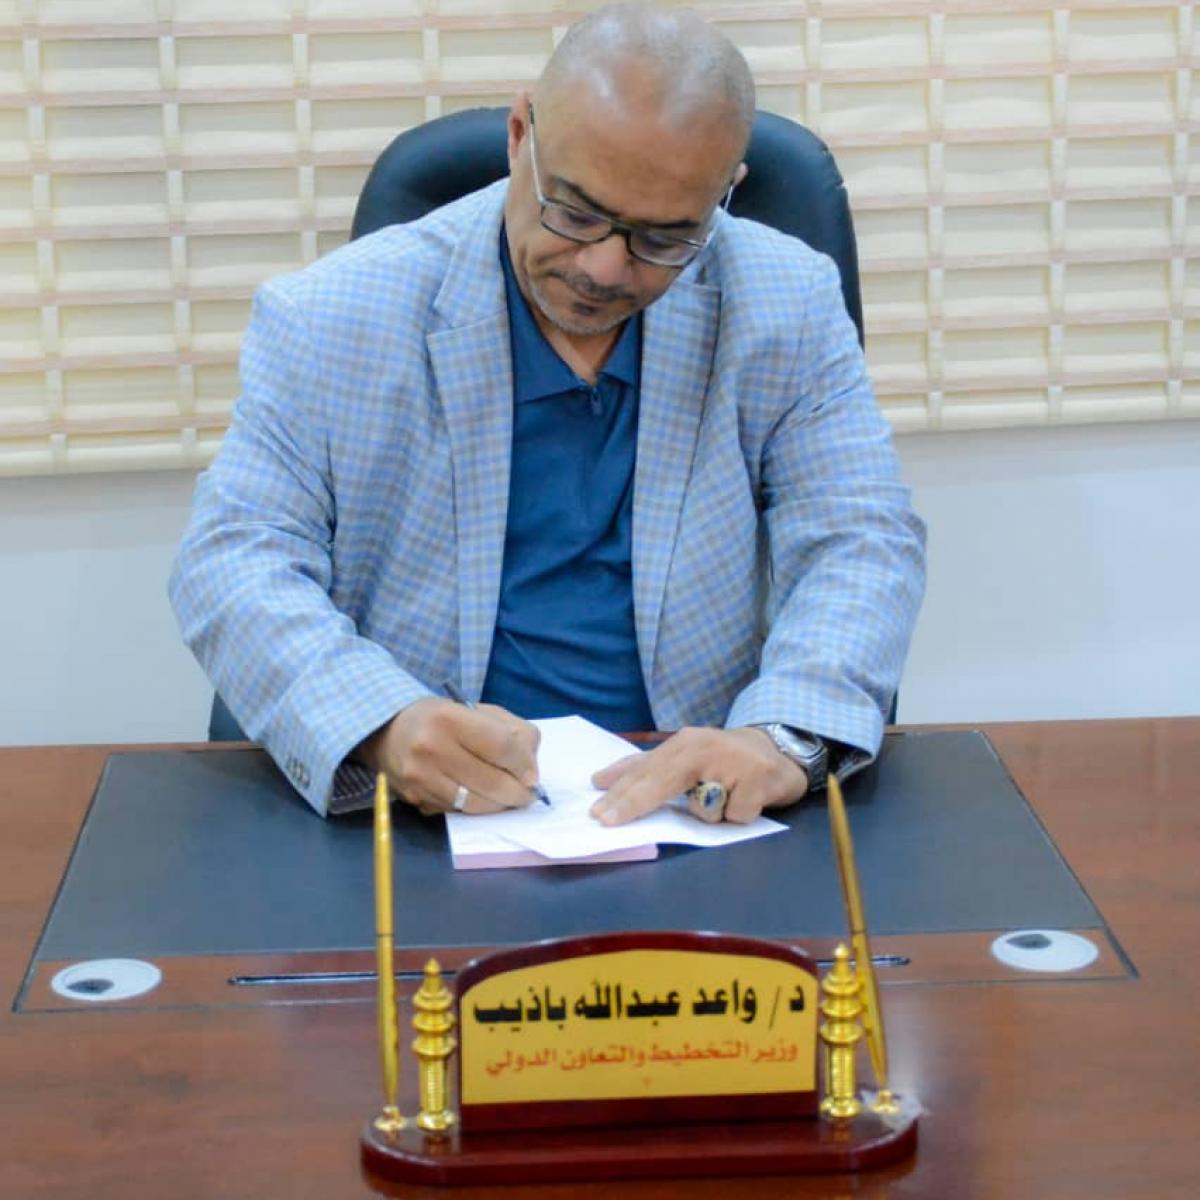 Minister of Planning and International Cooperation Dr. Waed Abdullah Batheeb